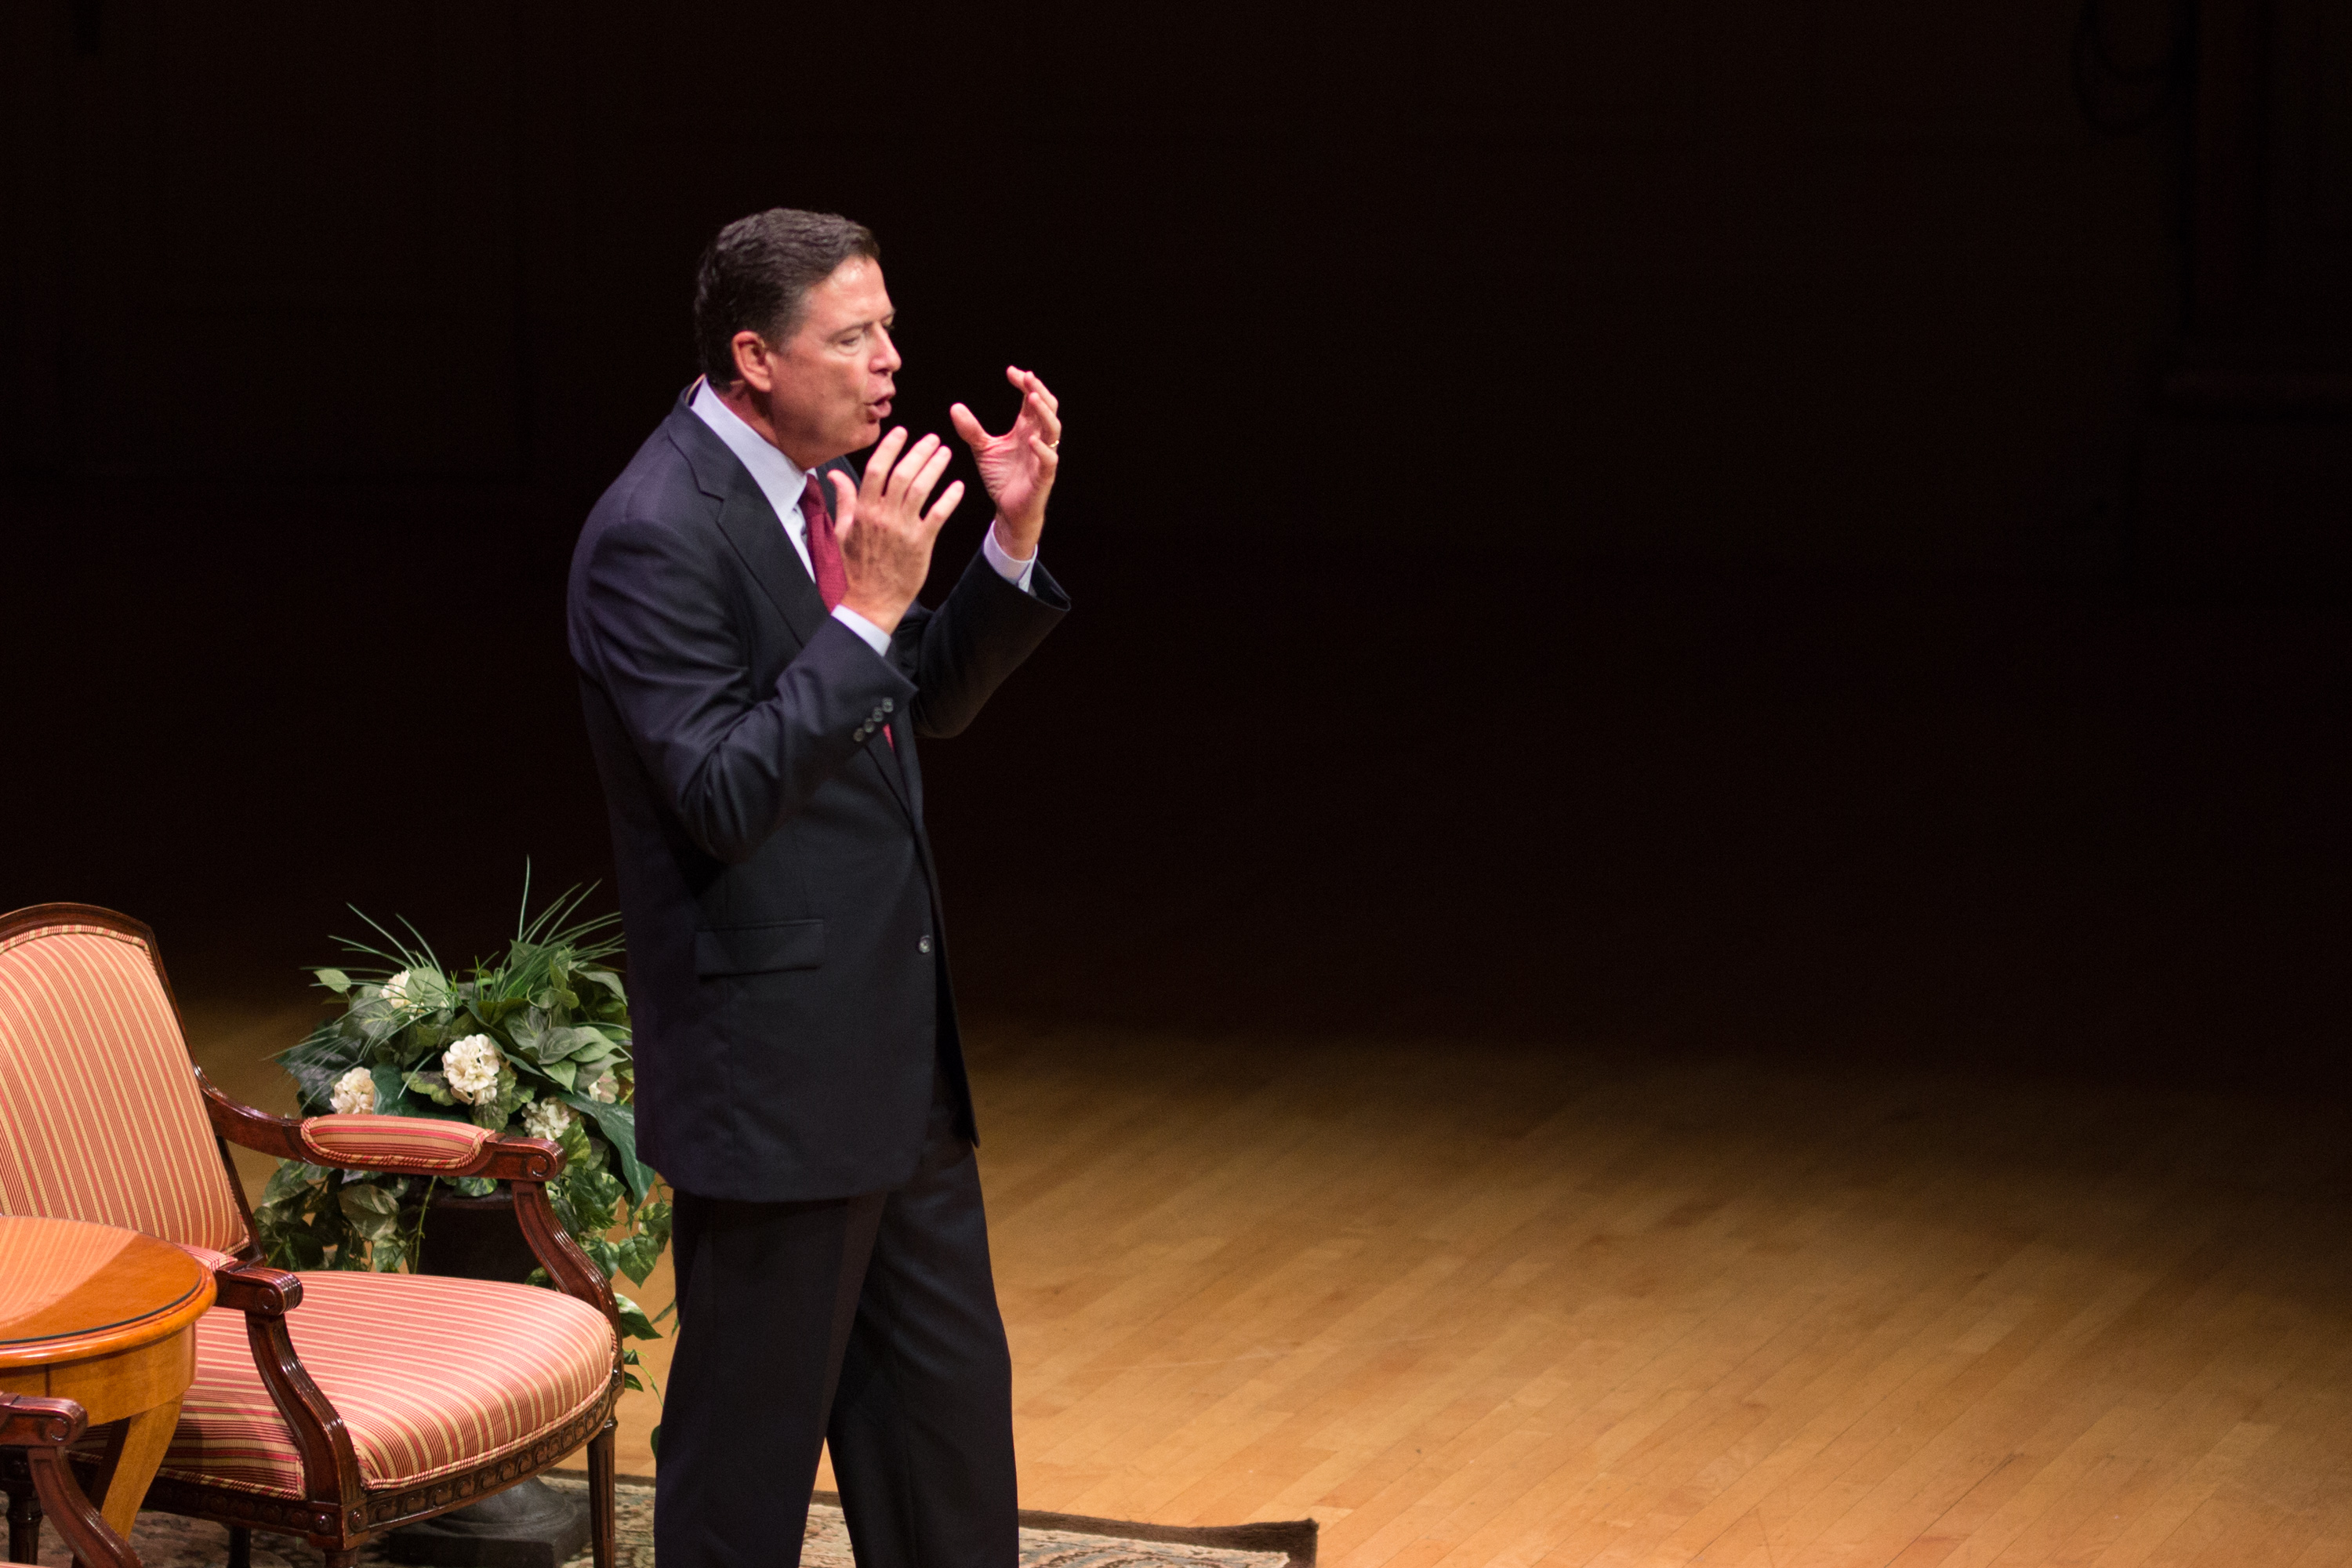 James Comey gestures with both hands while speaking on the Symphony Hall stage